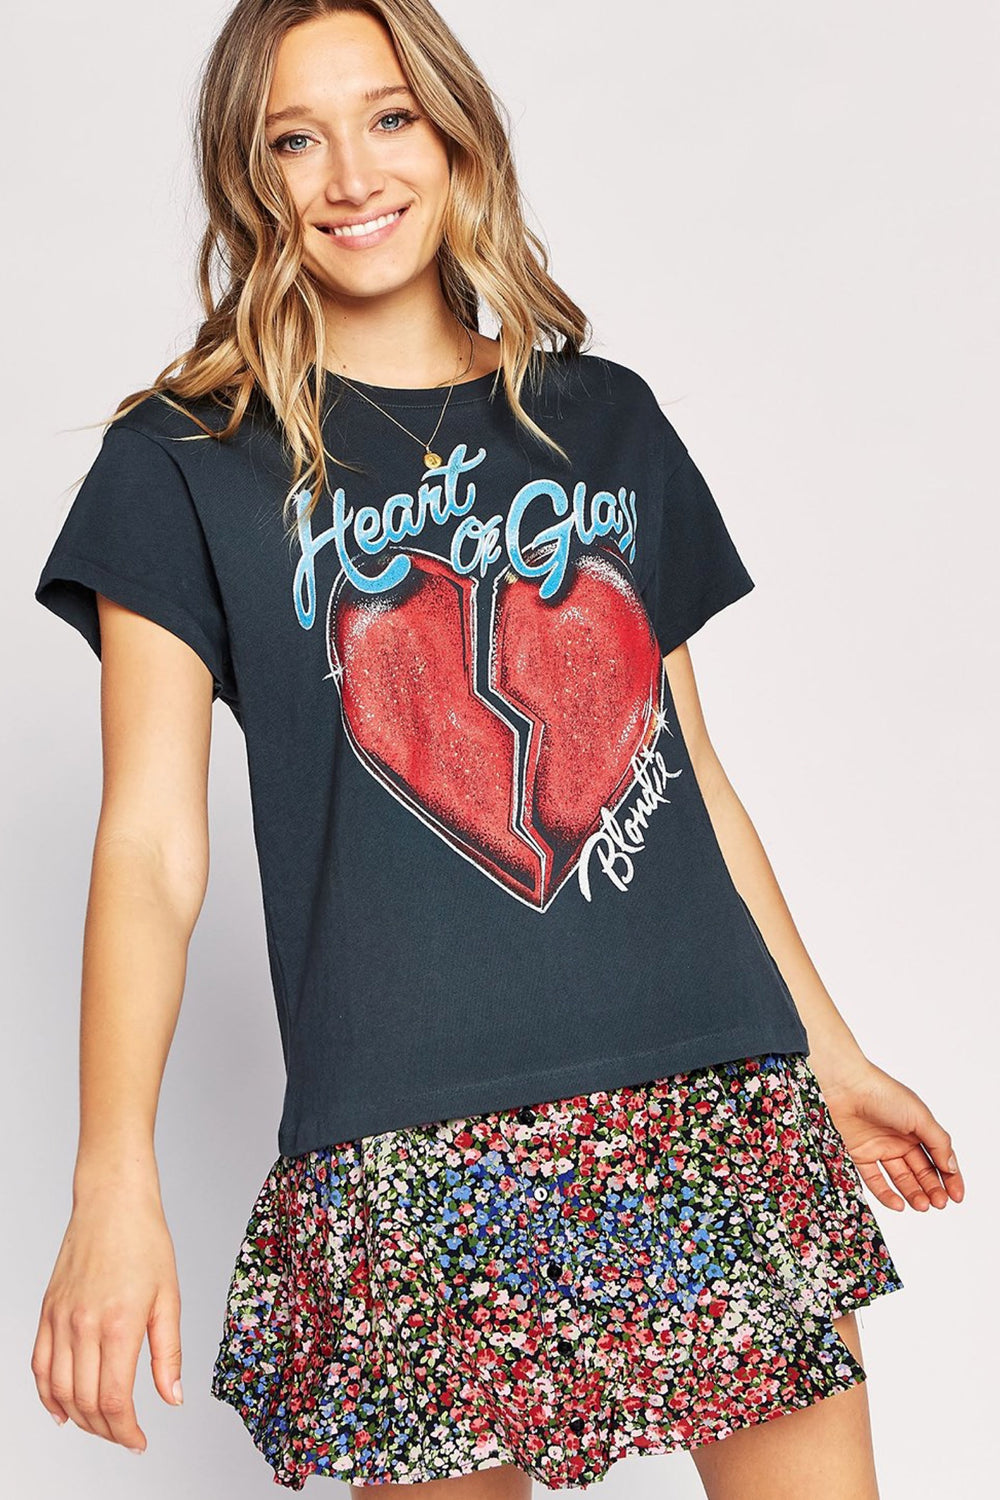 Blondie Heart Of Glass Tour Tee